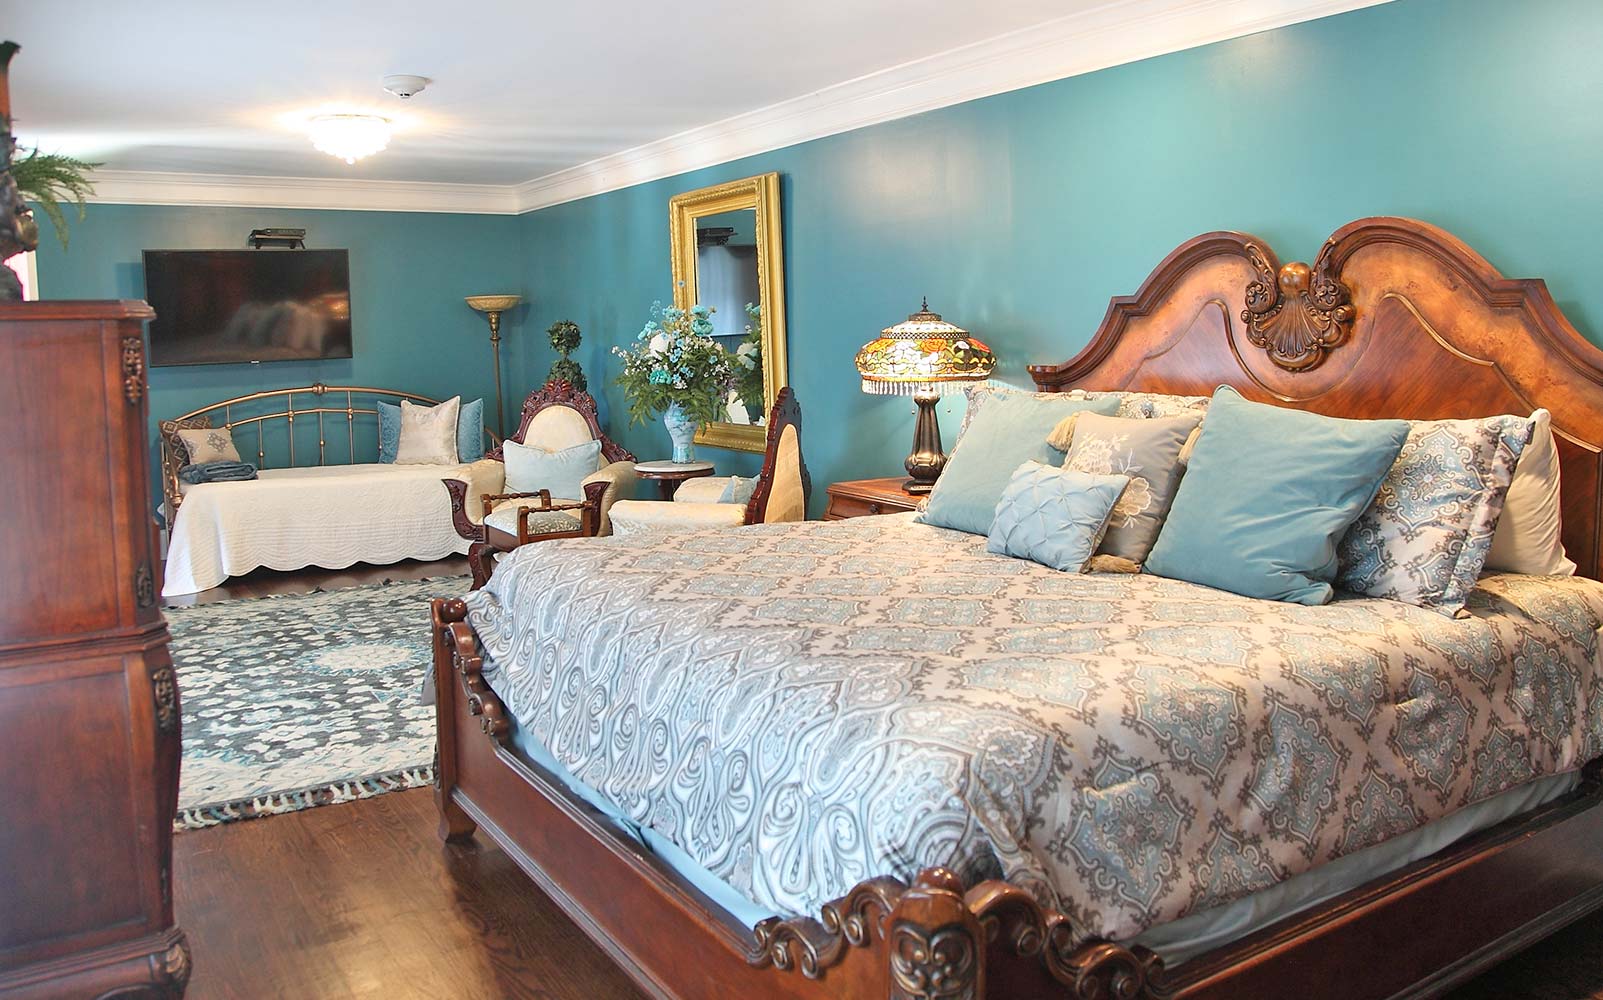 A stunningly beautiful and historic Bed and Breakfast near Broadway Street in downtown Nashville